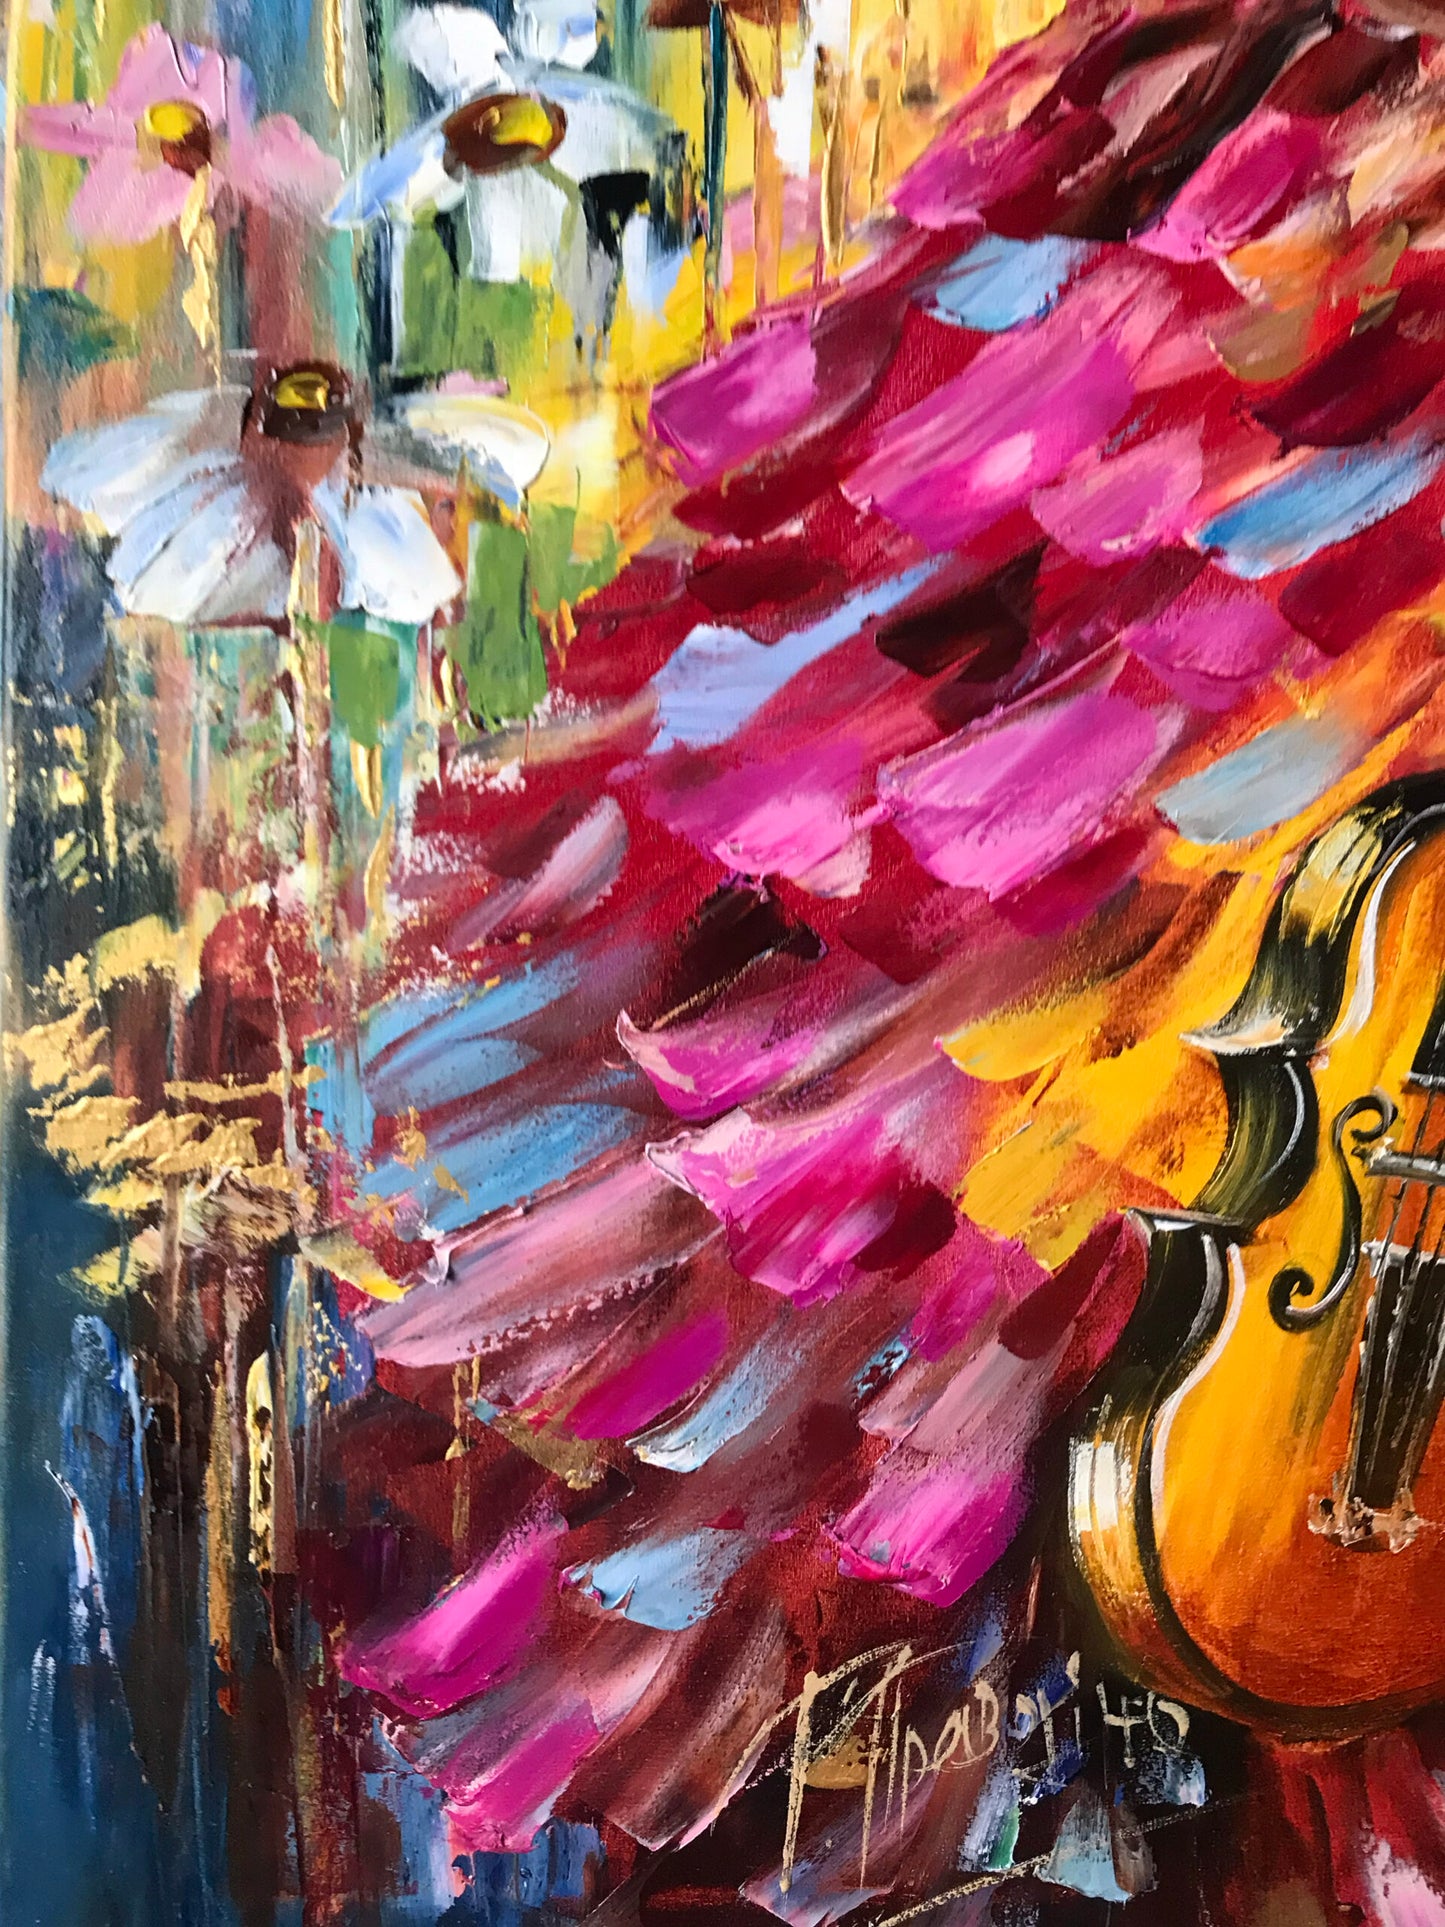 Abstract Woman Violinist Oil Painting Original Modern Music Wall Art Contemporary Girl in Pink Dress Painting on Canvas